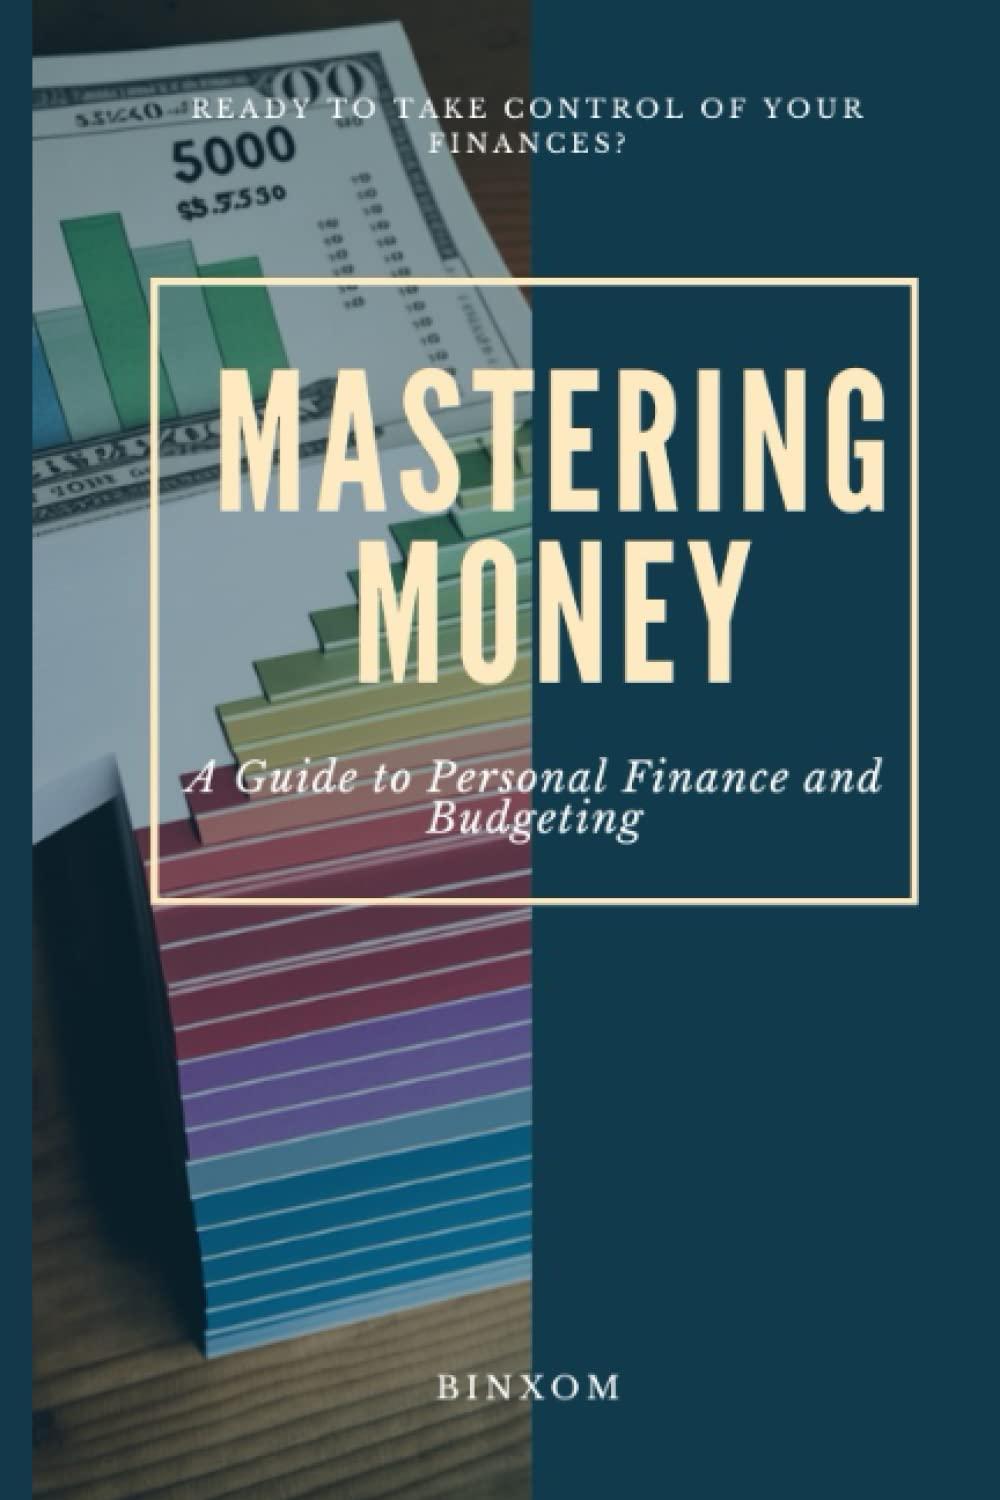 mastering money a guide to personal finance and budgeting 1st edition levi binxom b0bw3418zb, 979-8379075767